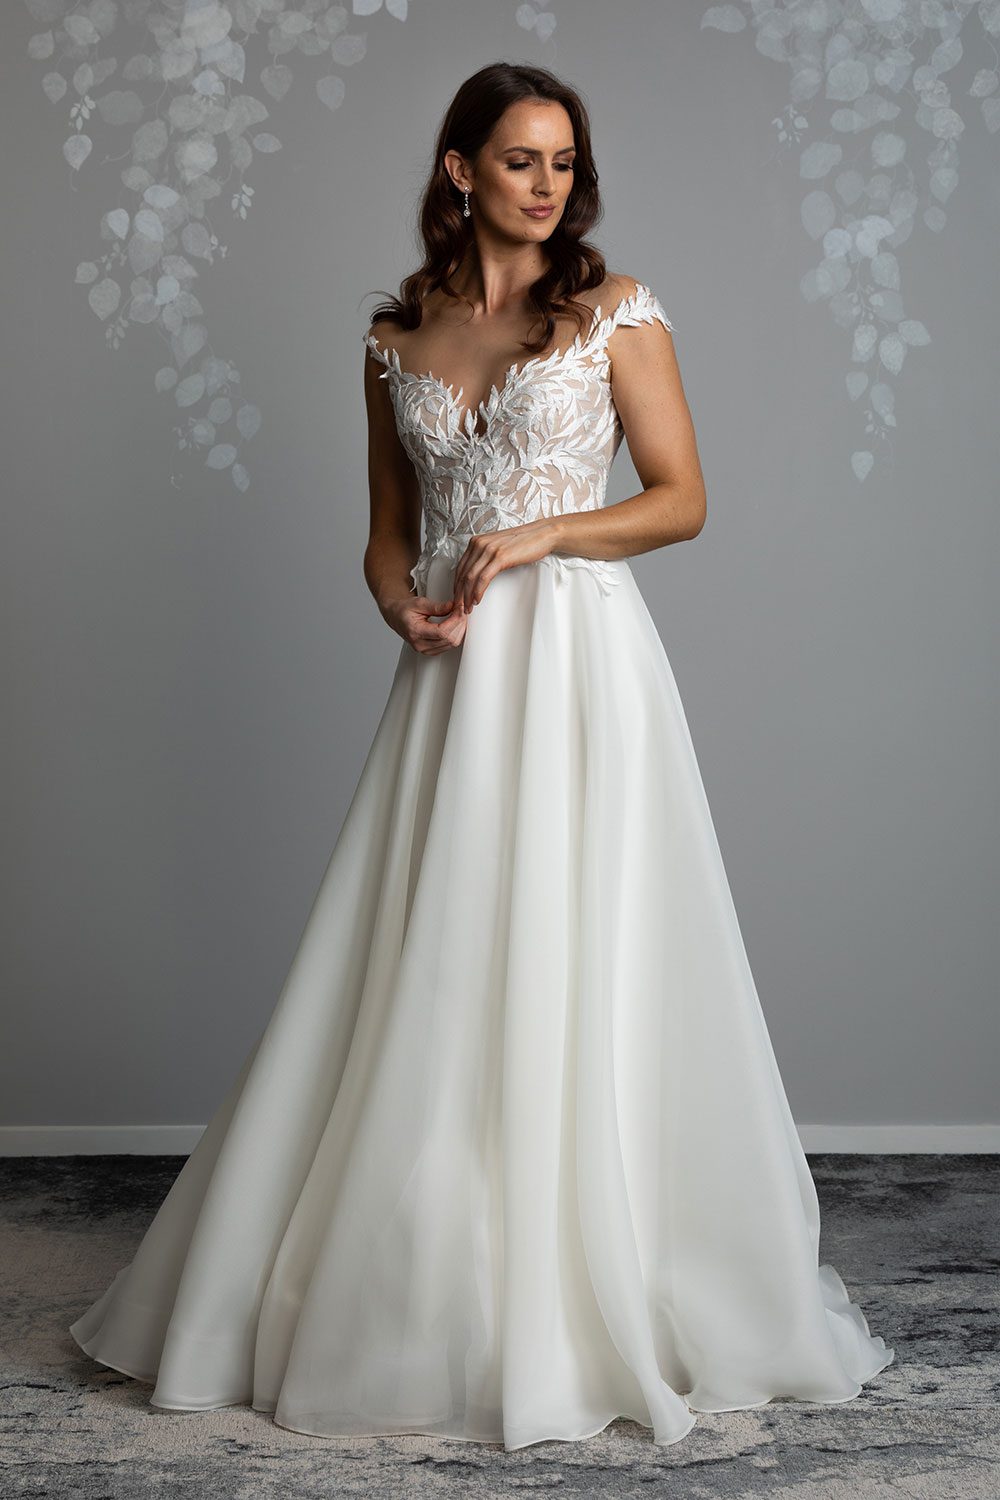 Ariana Wedding gown from Vinka Design - This gorgeous gown features delicate leaf lace hand-appliqued throughout the semi-sheer, structured bodice and up over the shoulder and skirt made of dreamy satin organza layers. Front view of model with hands clasped across waist where the bodice and skirt meet